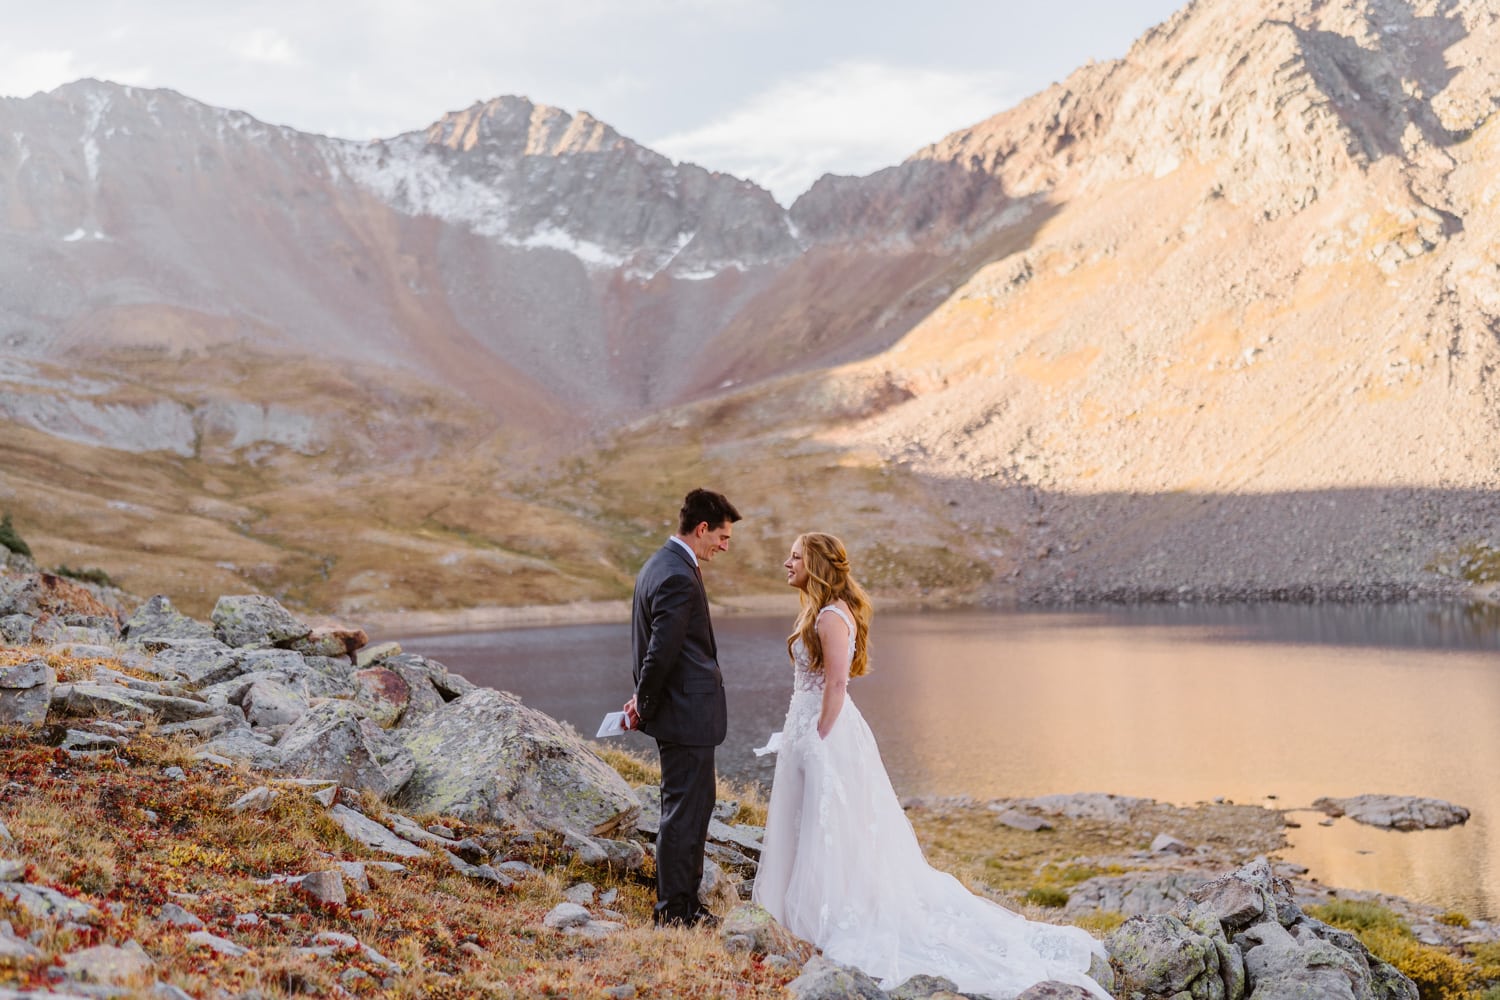 A couple sharing their vows at an alpine lake in Colorado for their Self-Solemnization.